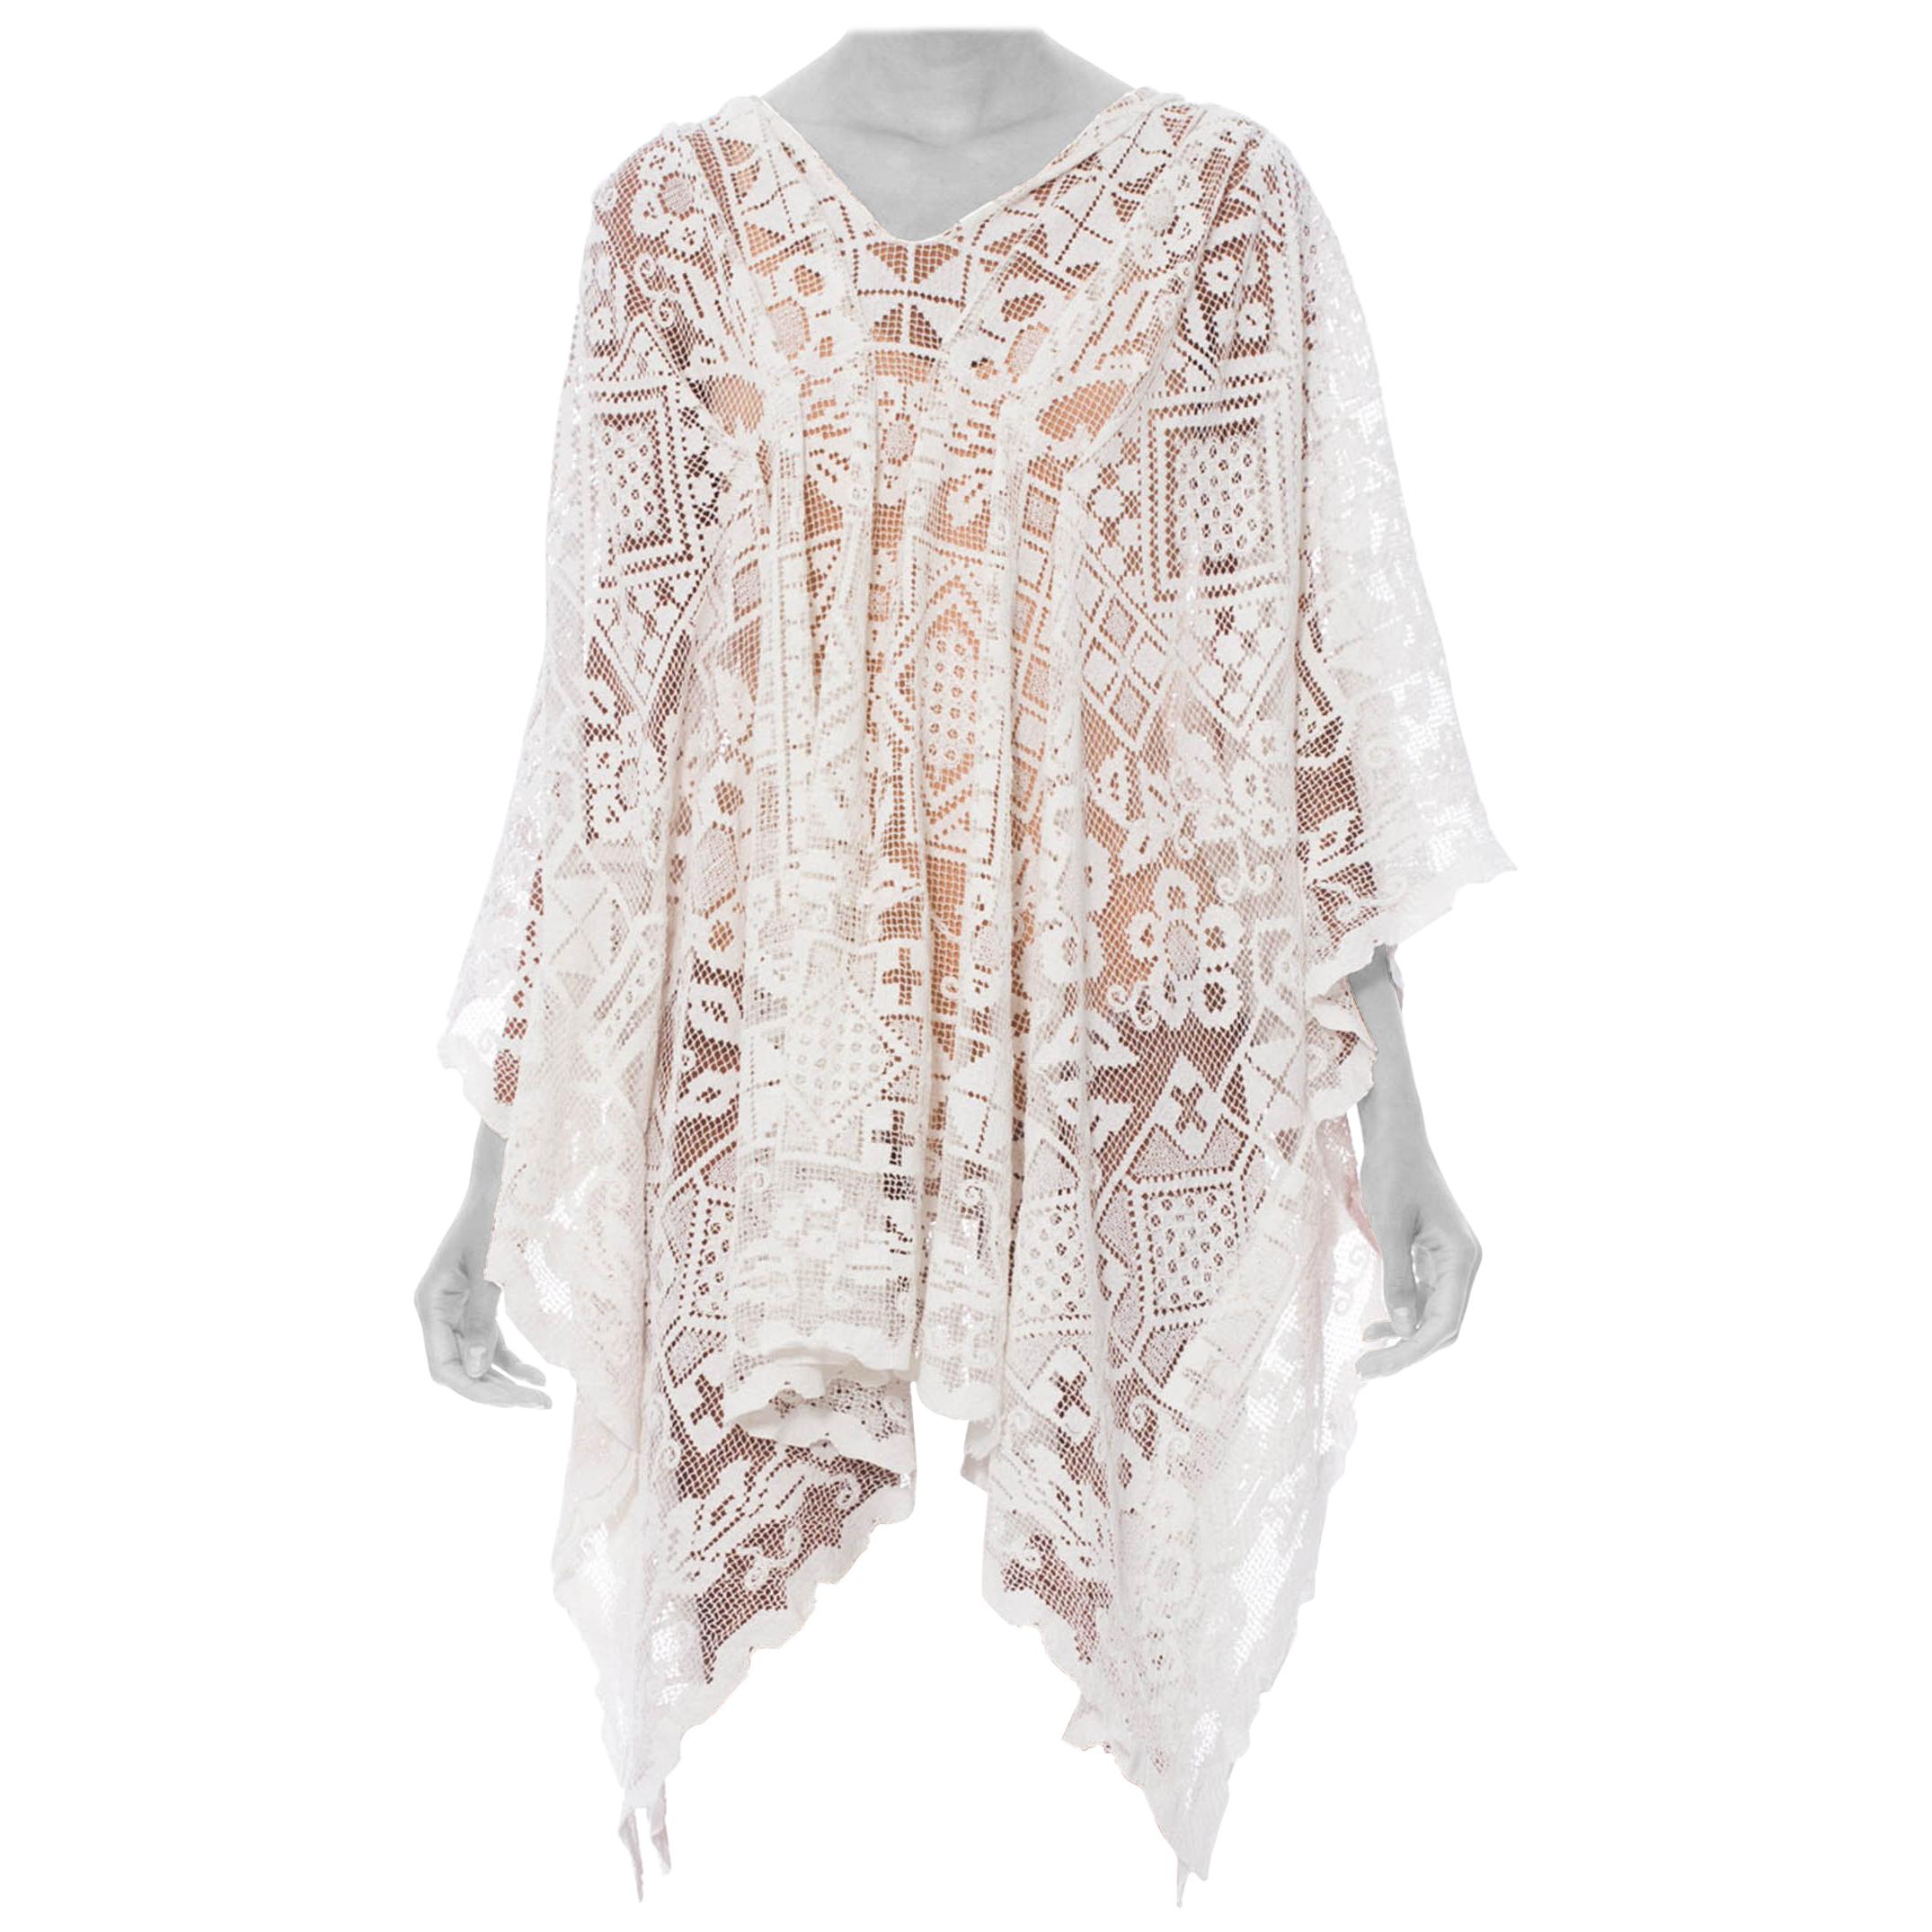 MORPHEW COLLECTION White Cotton Handmade Filet Lace Kaftan Tunic Beach Cover-Up